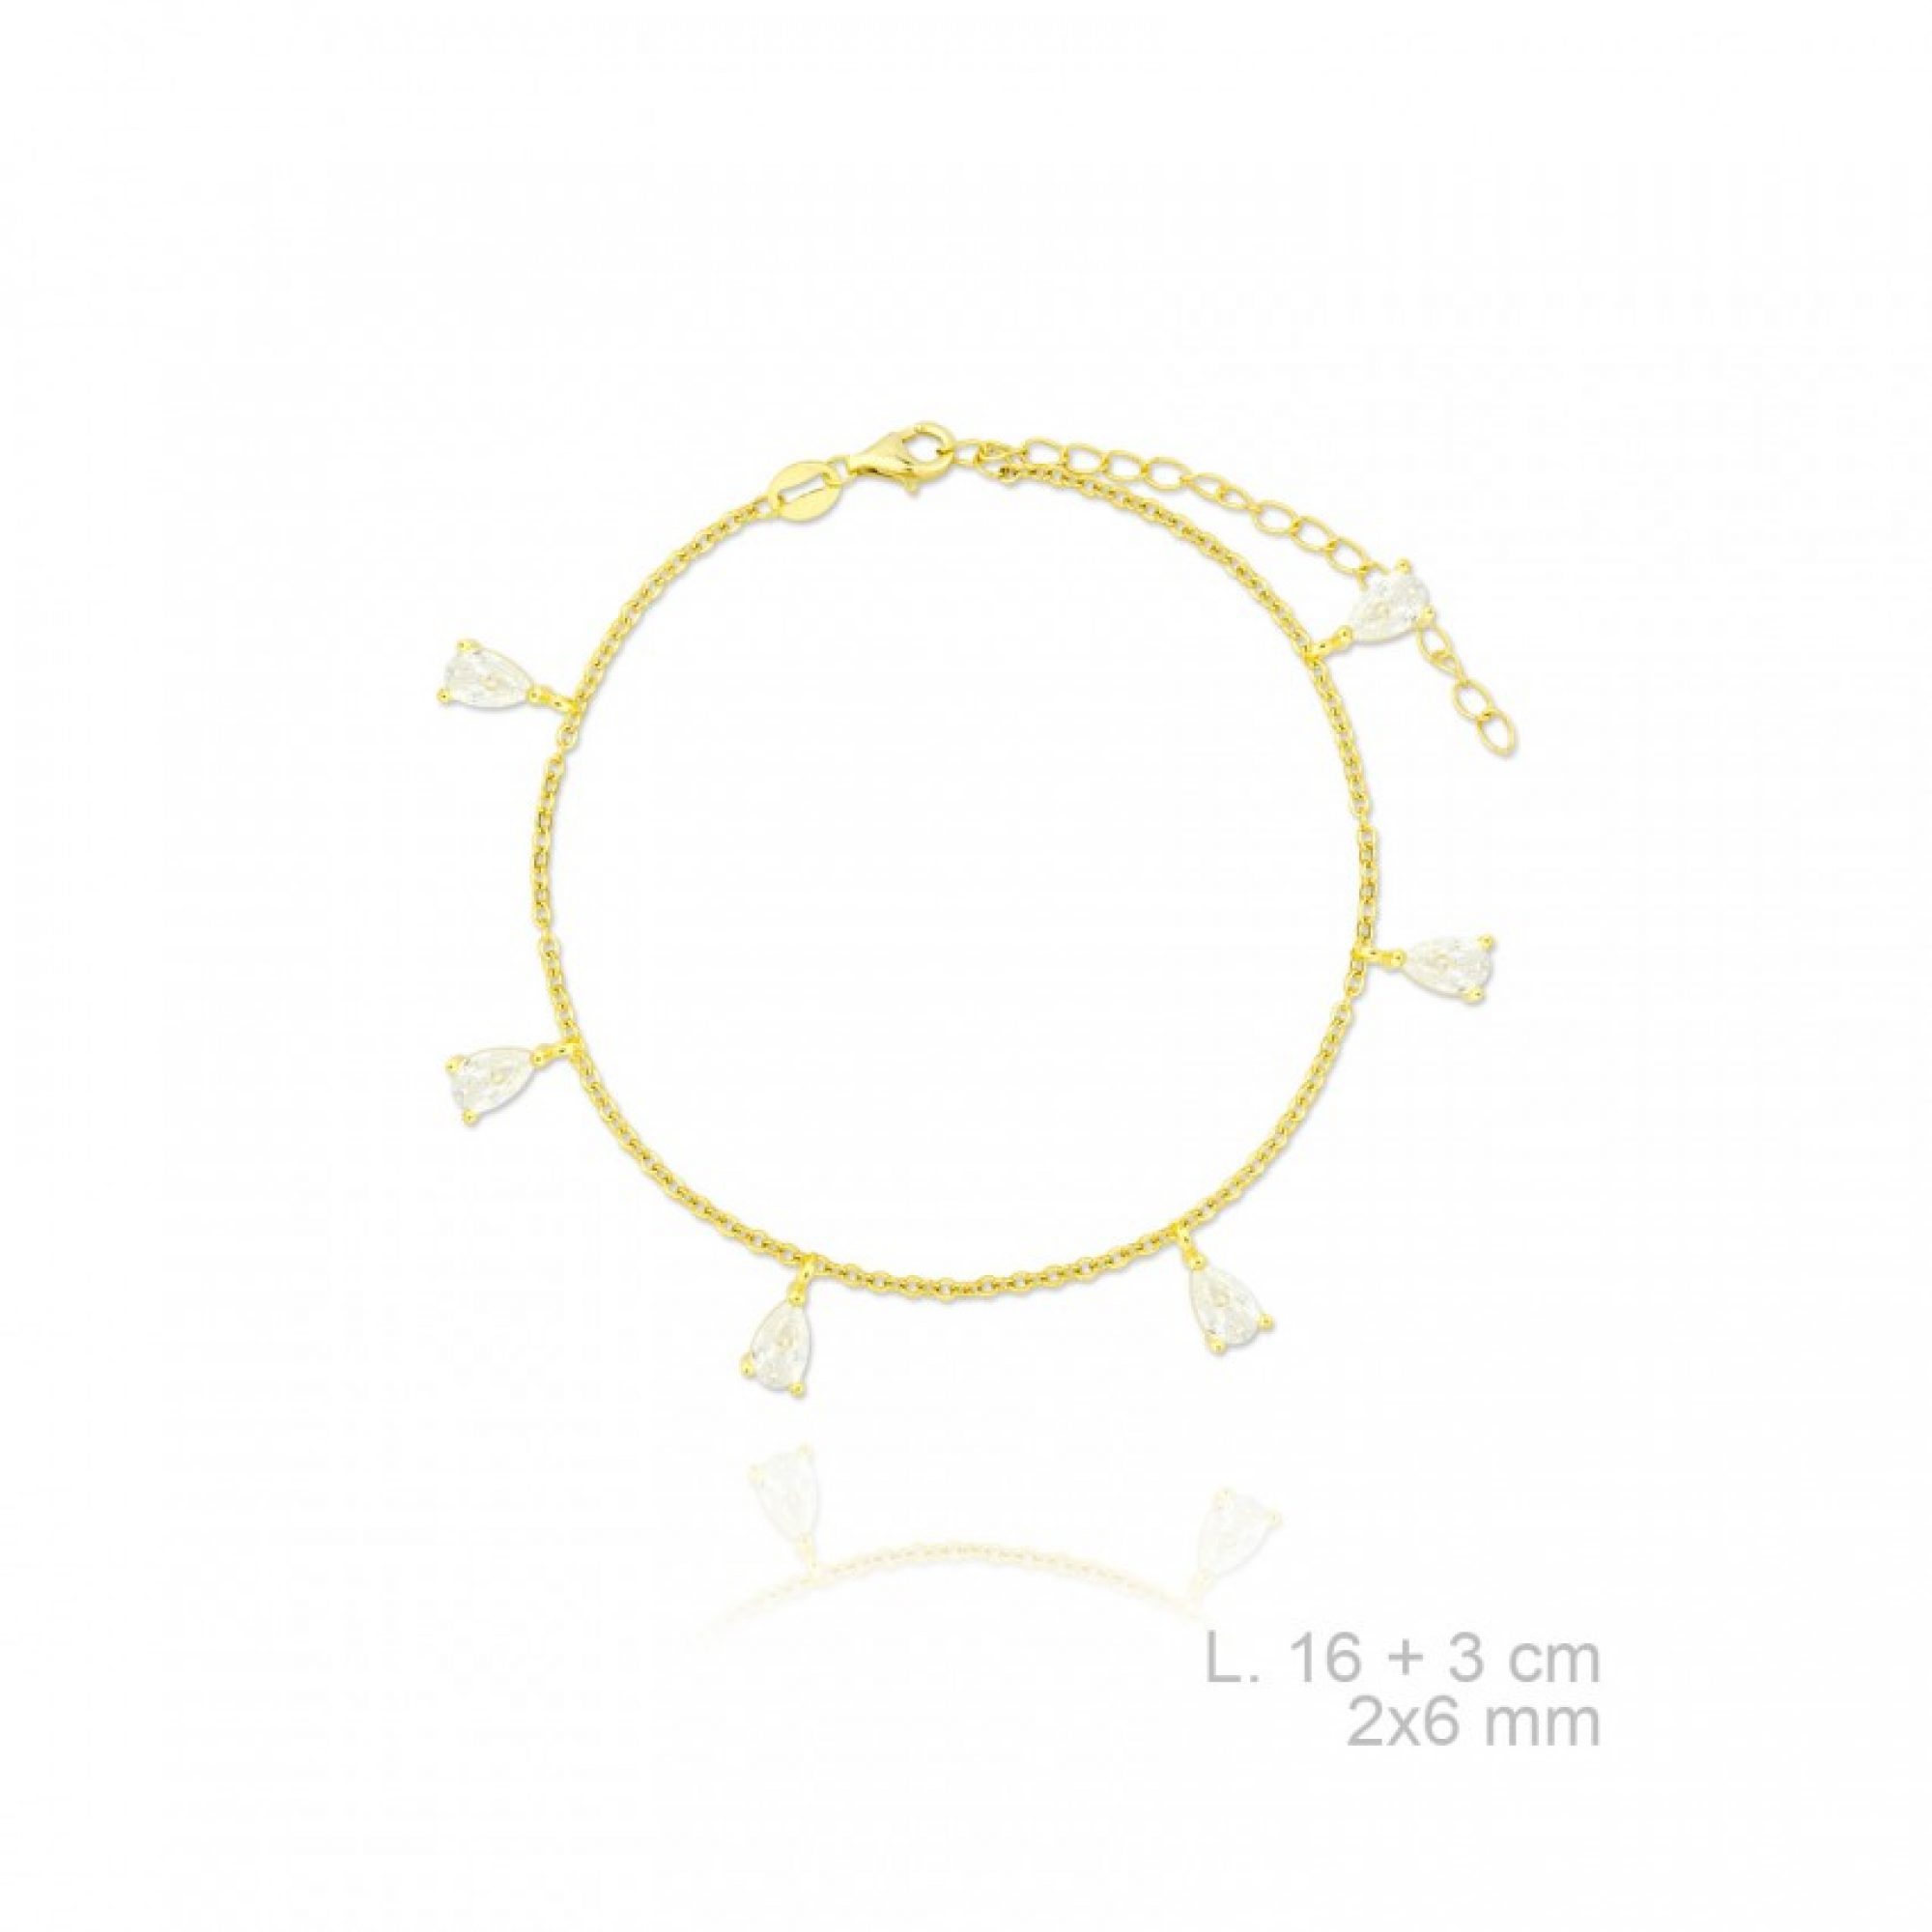 Gold plated bracelet with natural zircon stones